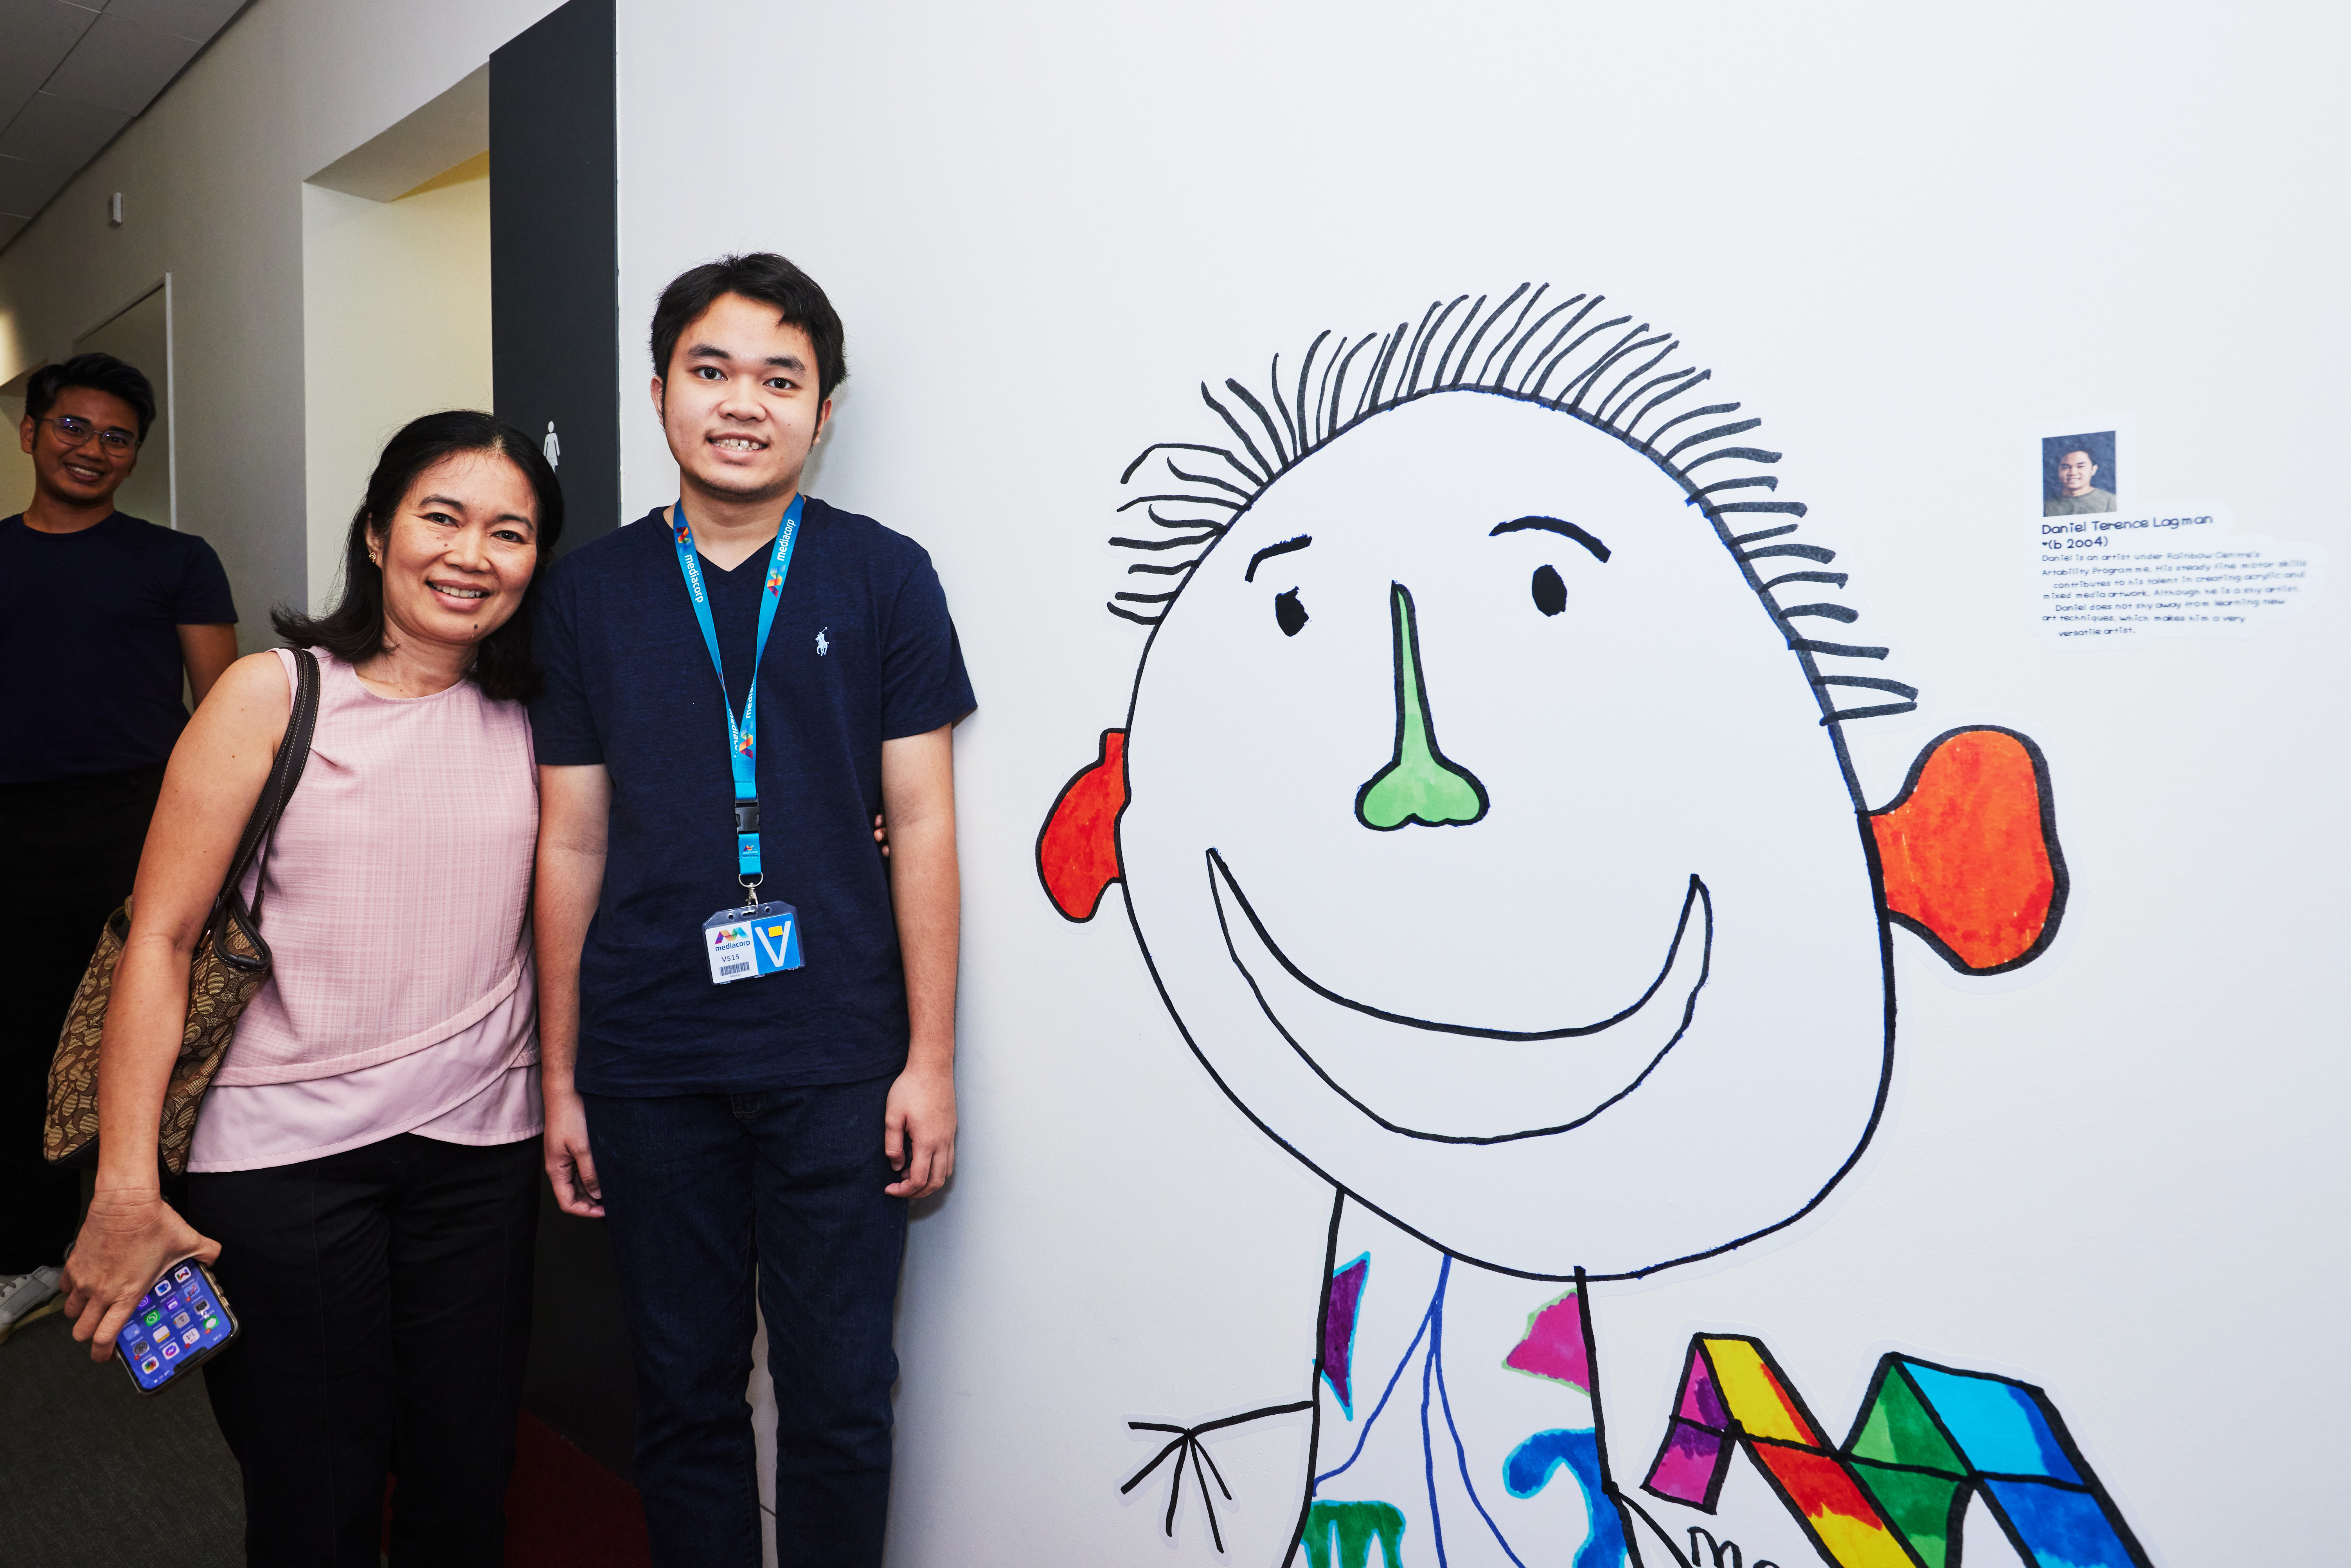 Daniel Terence Lagman  - Artist from Rainbow Centre, smiles brightly with his mother beside his wall sticker mural